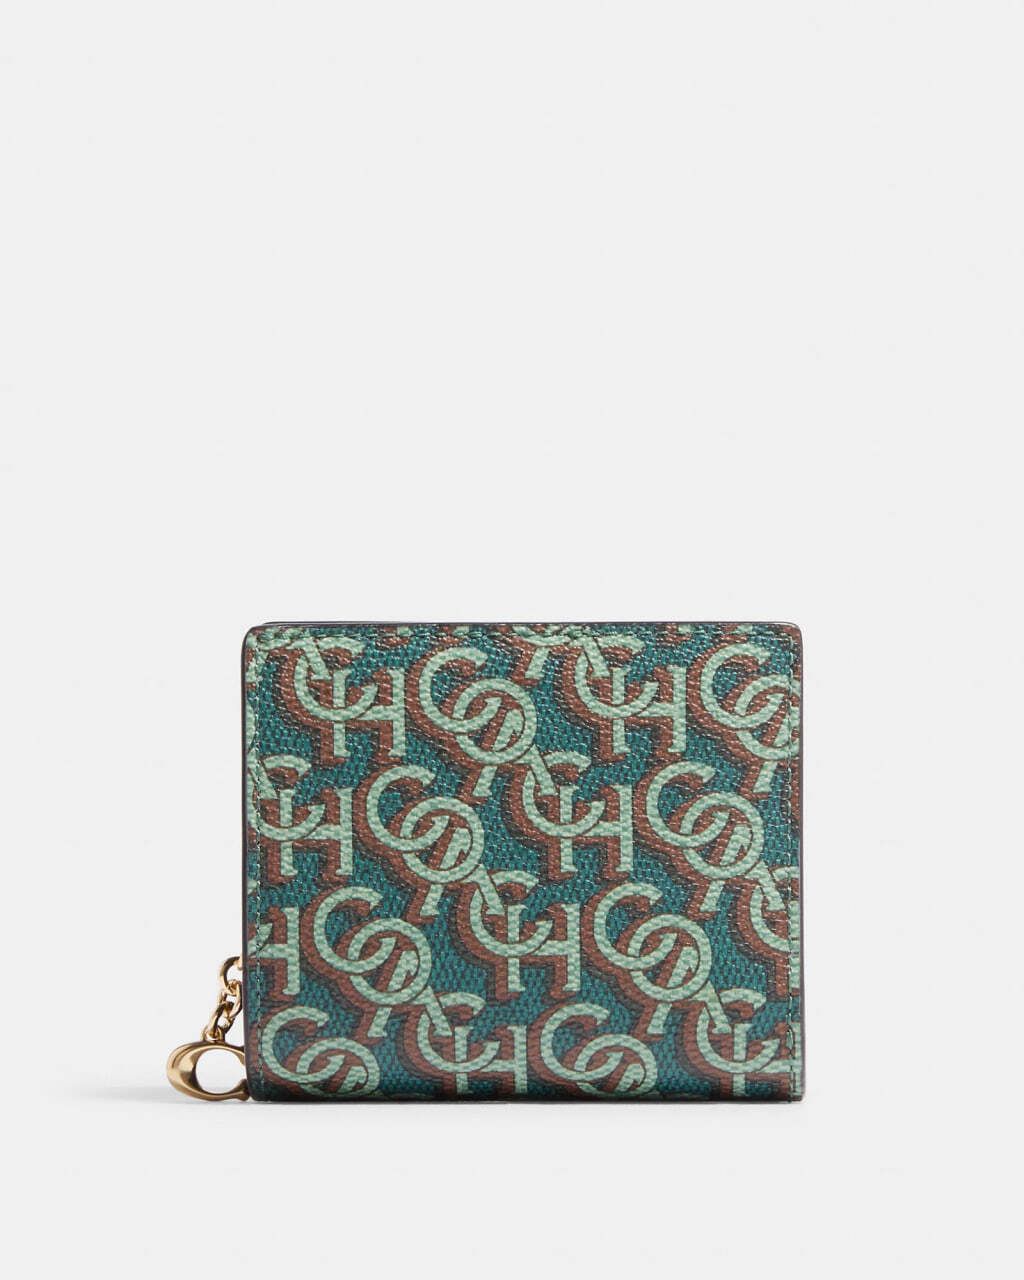 handbagbranded.com getlush outlet personalshopper usa malaysia ready stock Coach Malaysia Coach Snap Wallet With Coach Monogram Print in Green